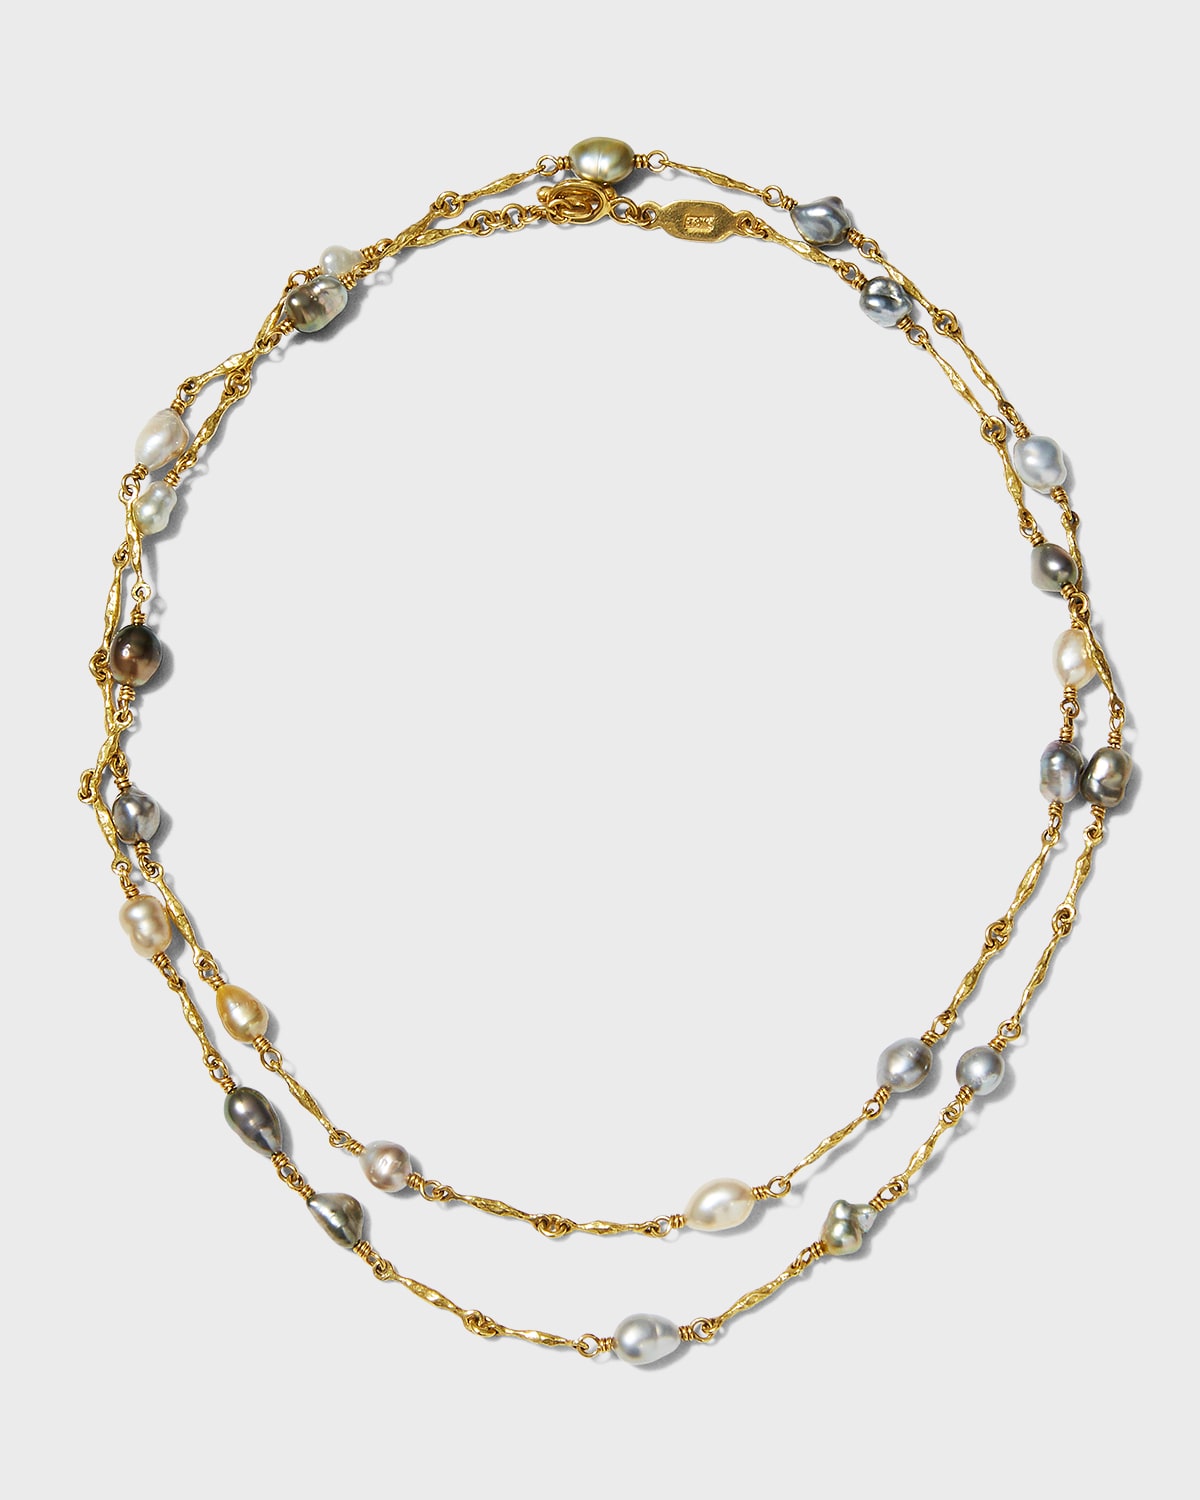 Old Money Keshi Pearl-Link Chain Necklace, 31"L